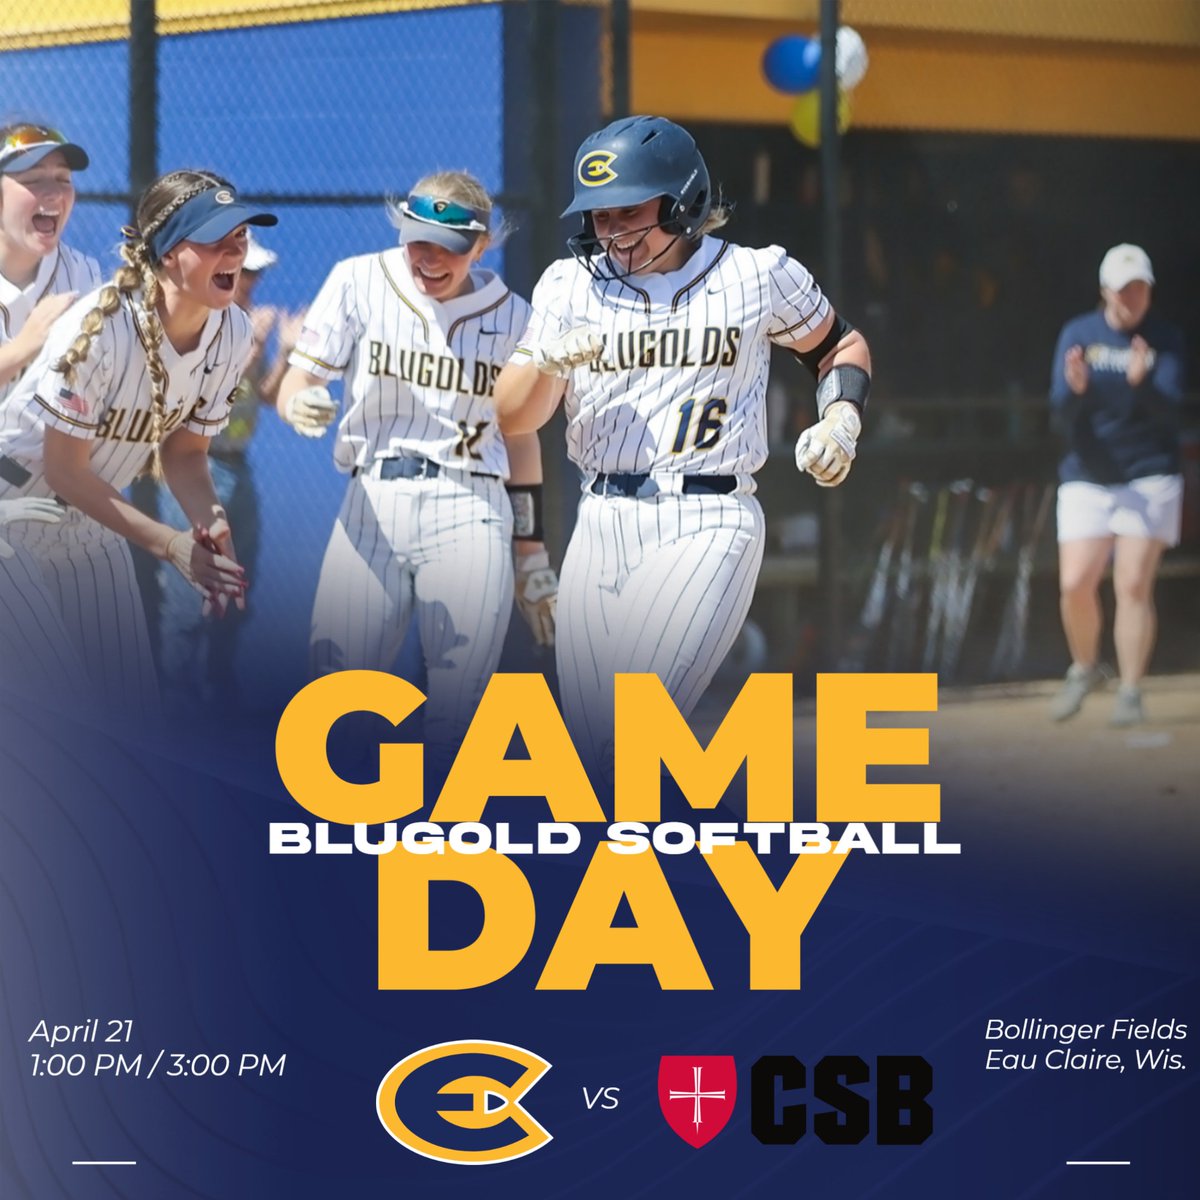 😎All smiles for some softball on a Sunday! ☀️ First pitch is set for 1pm against @CSBSoftball! Follow along at blugolds.com! #RollGolds #BeHeroic